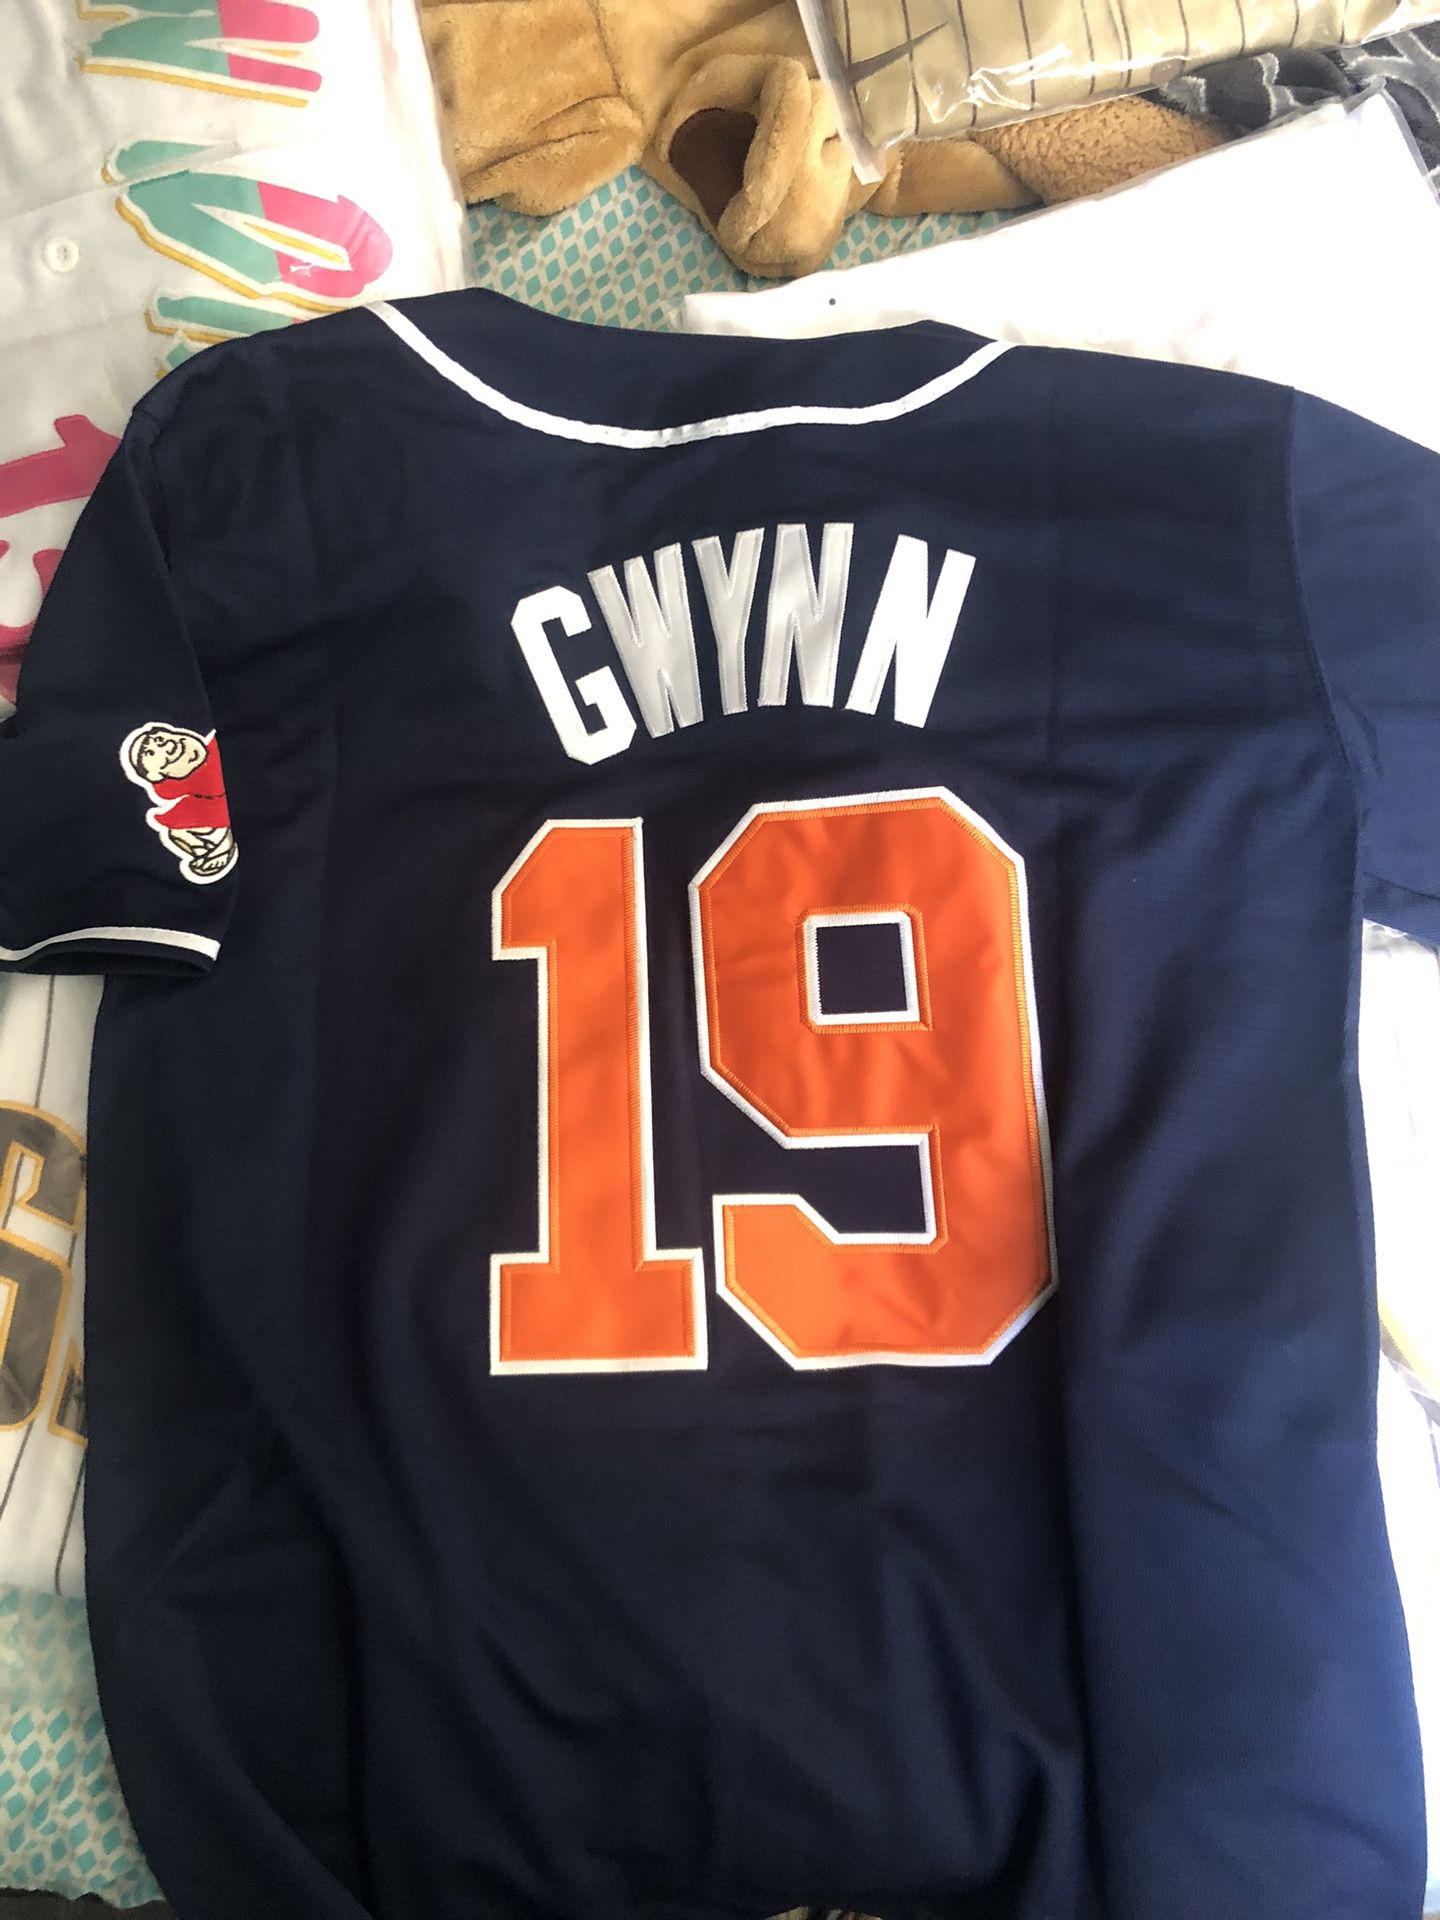 Padres Basketball Jersey for Sale in Chula Vista, CA - OfferUp